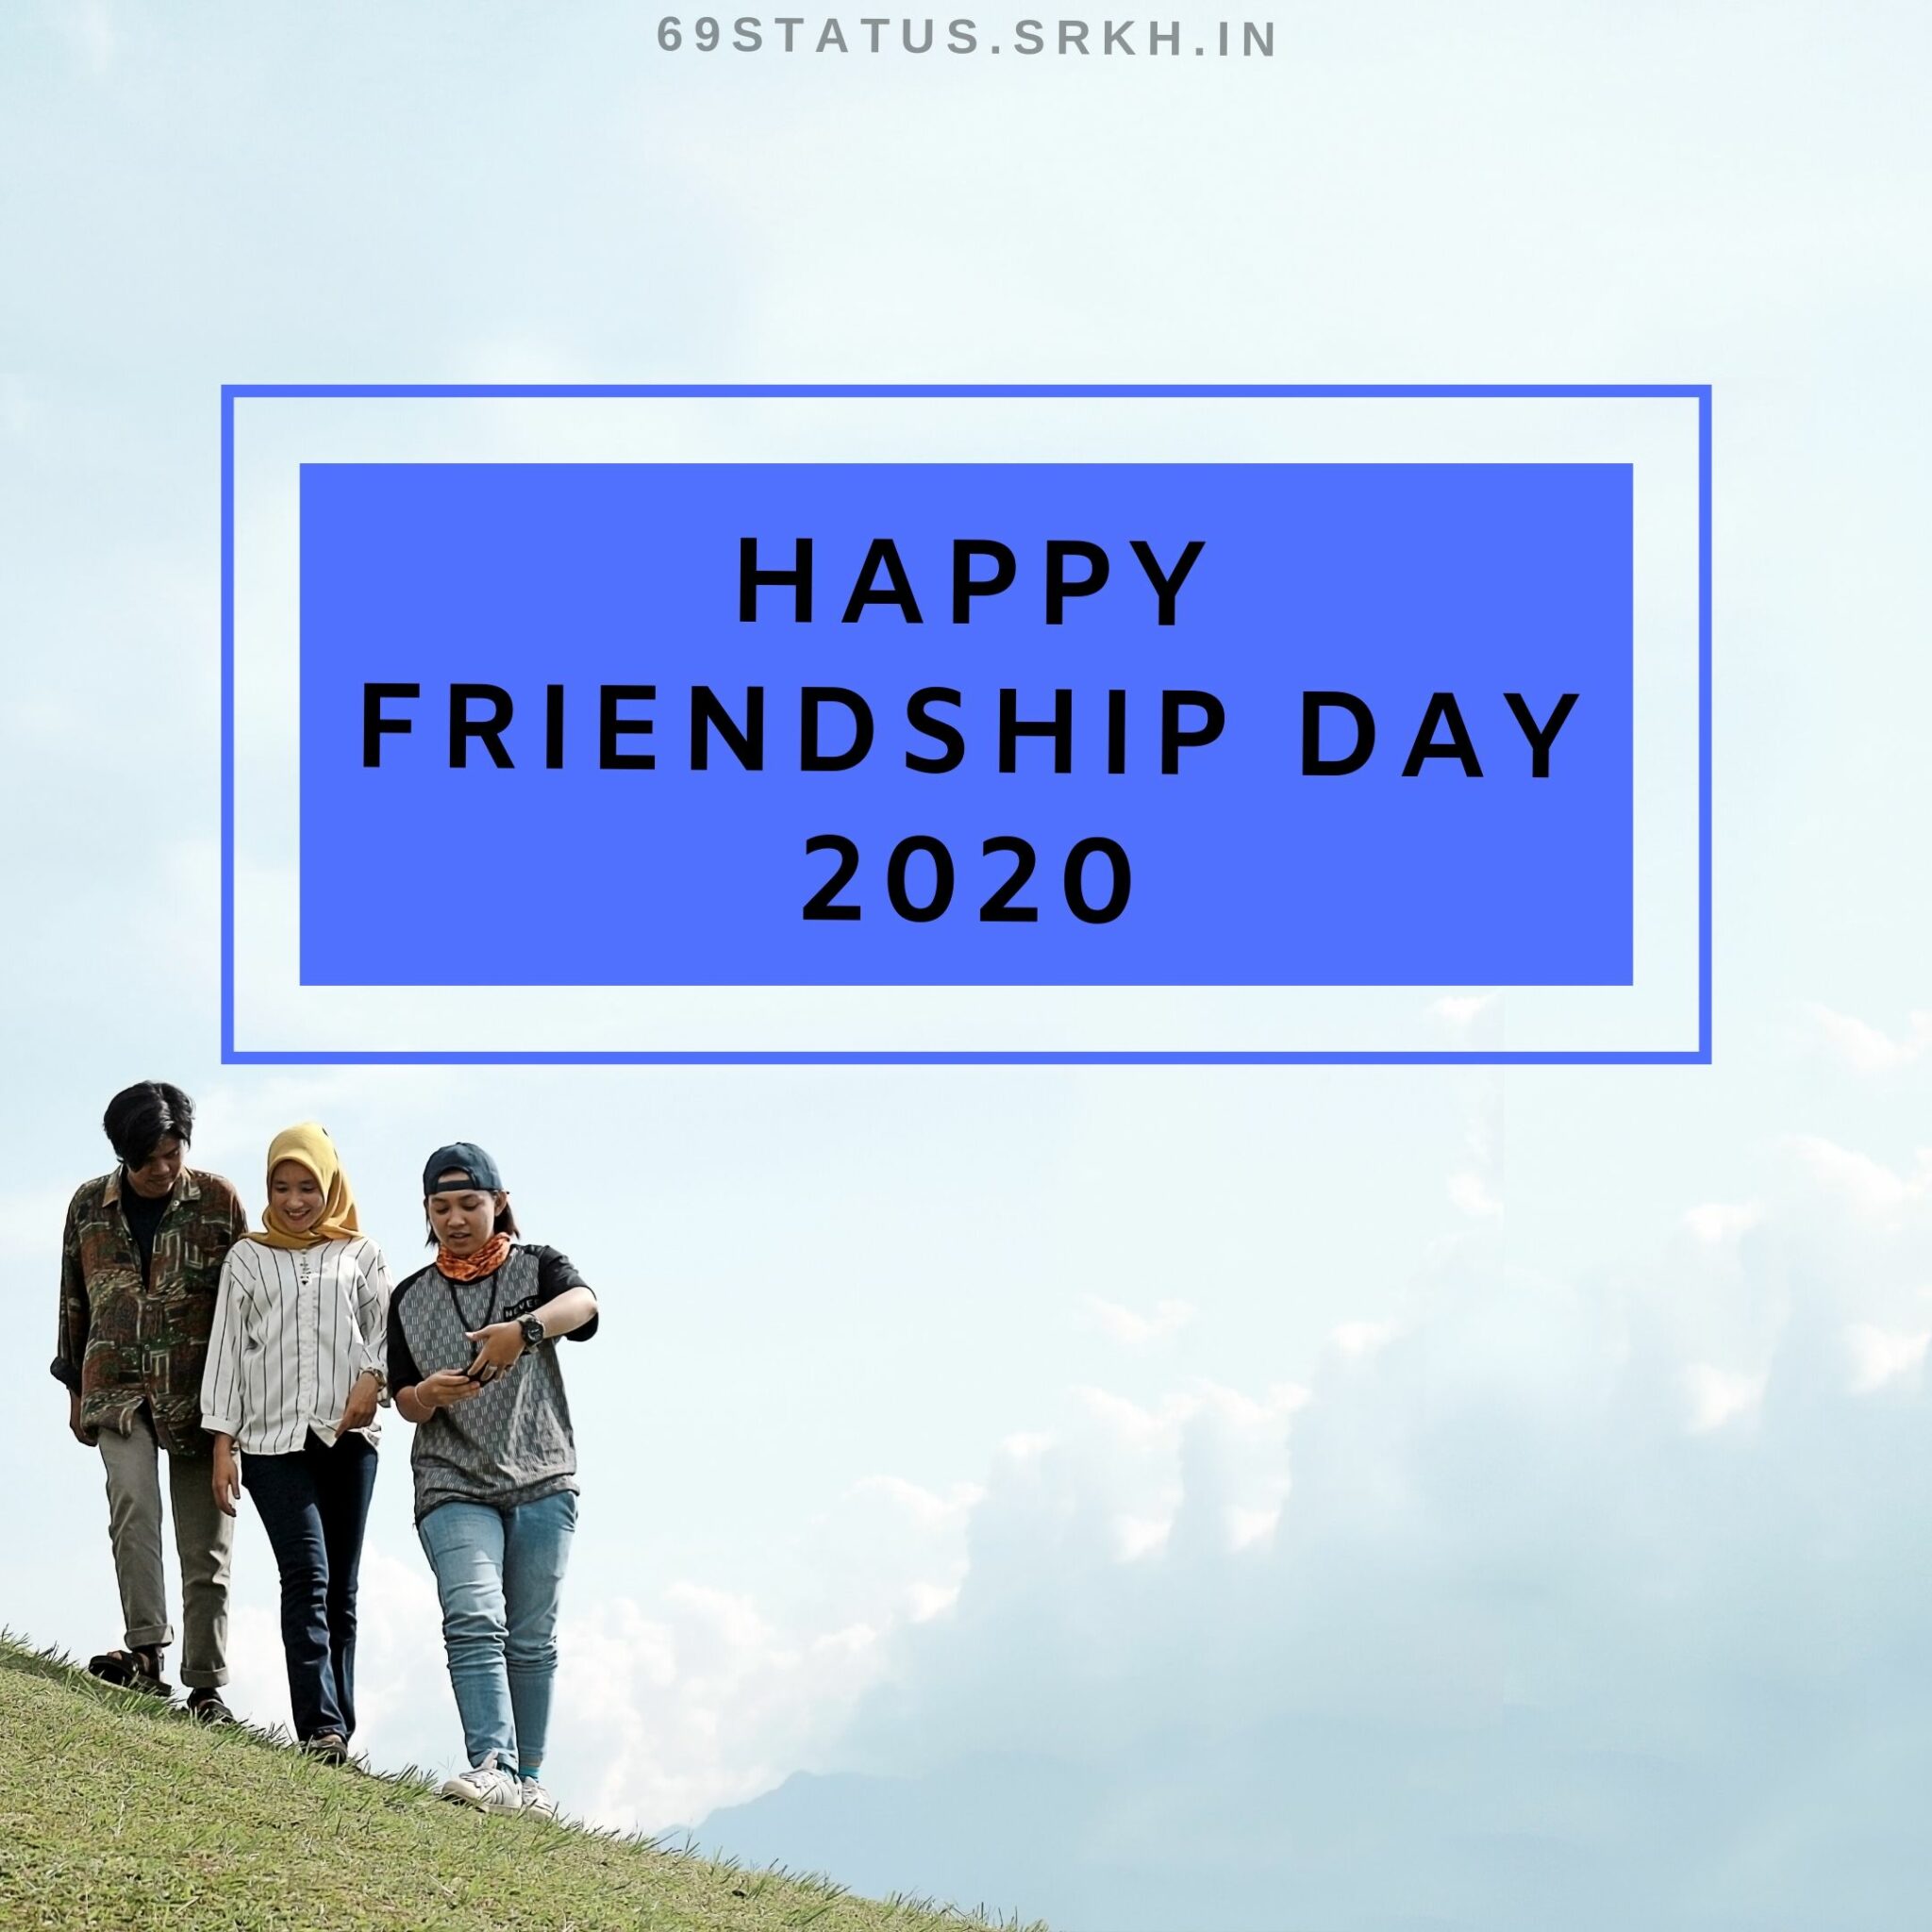 Friendship Day 2020 Images